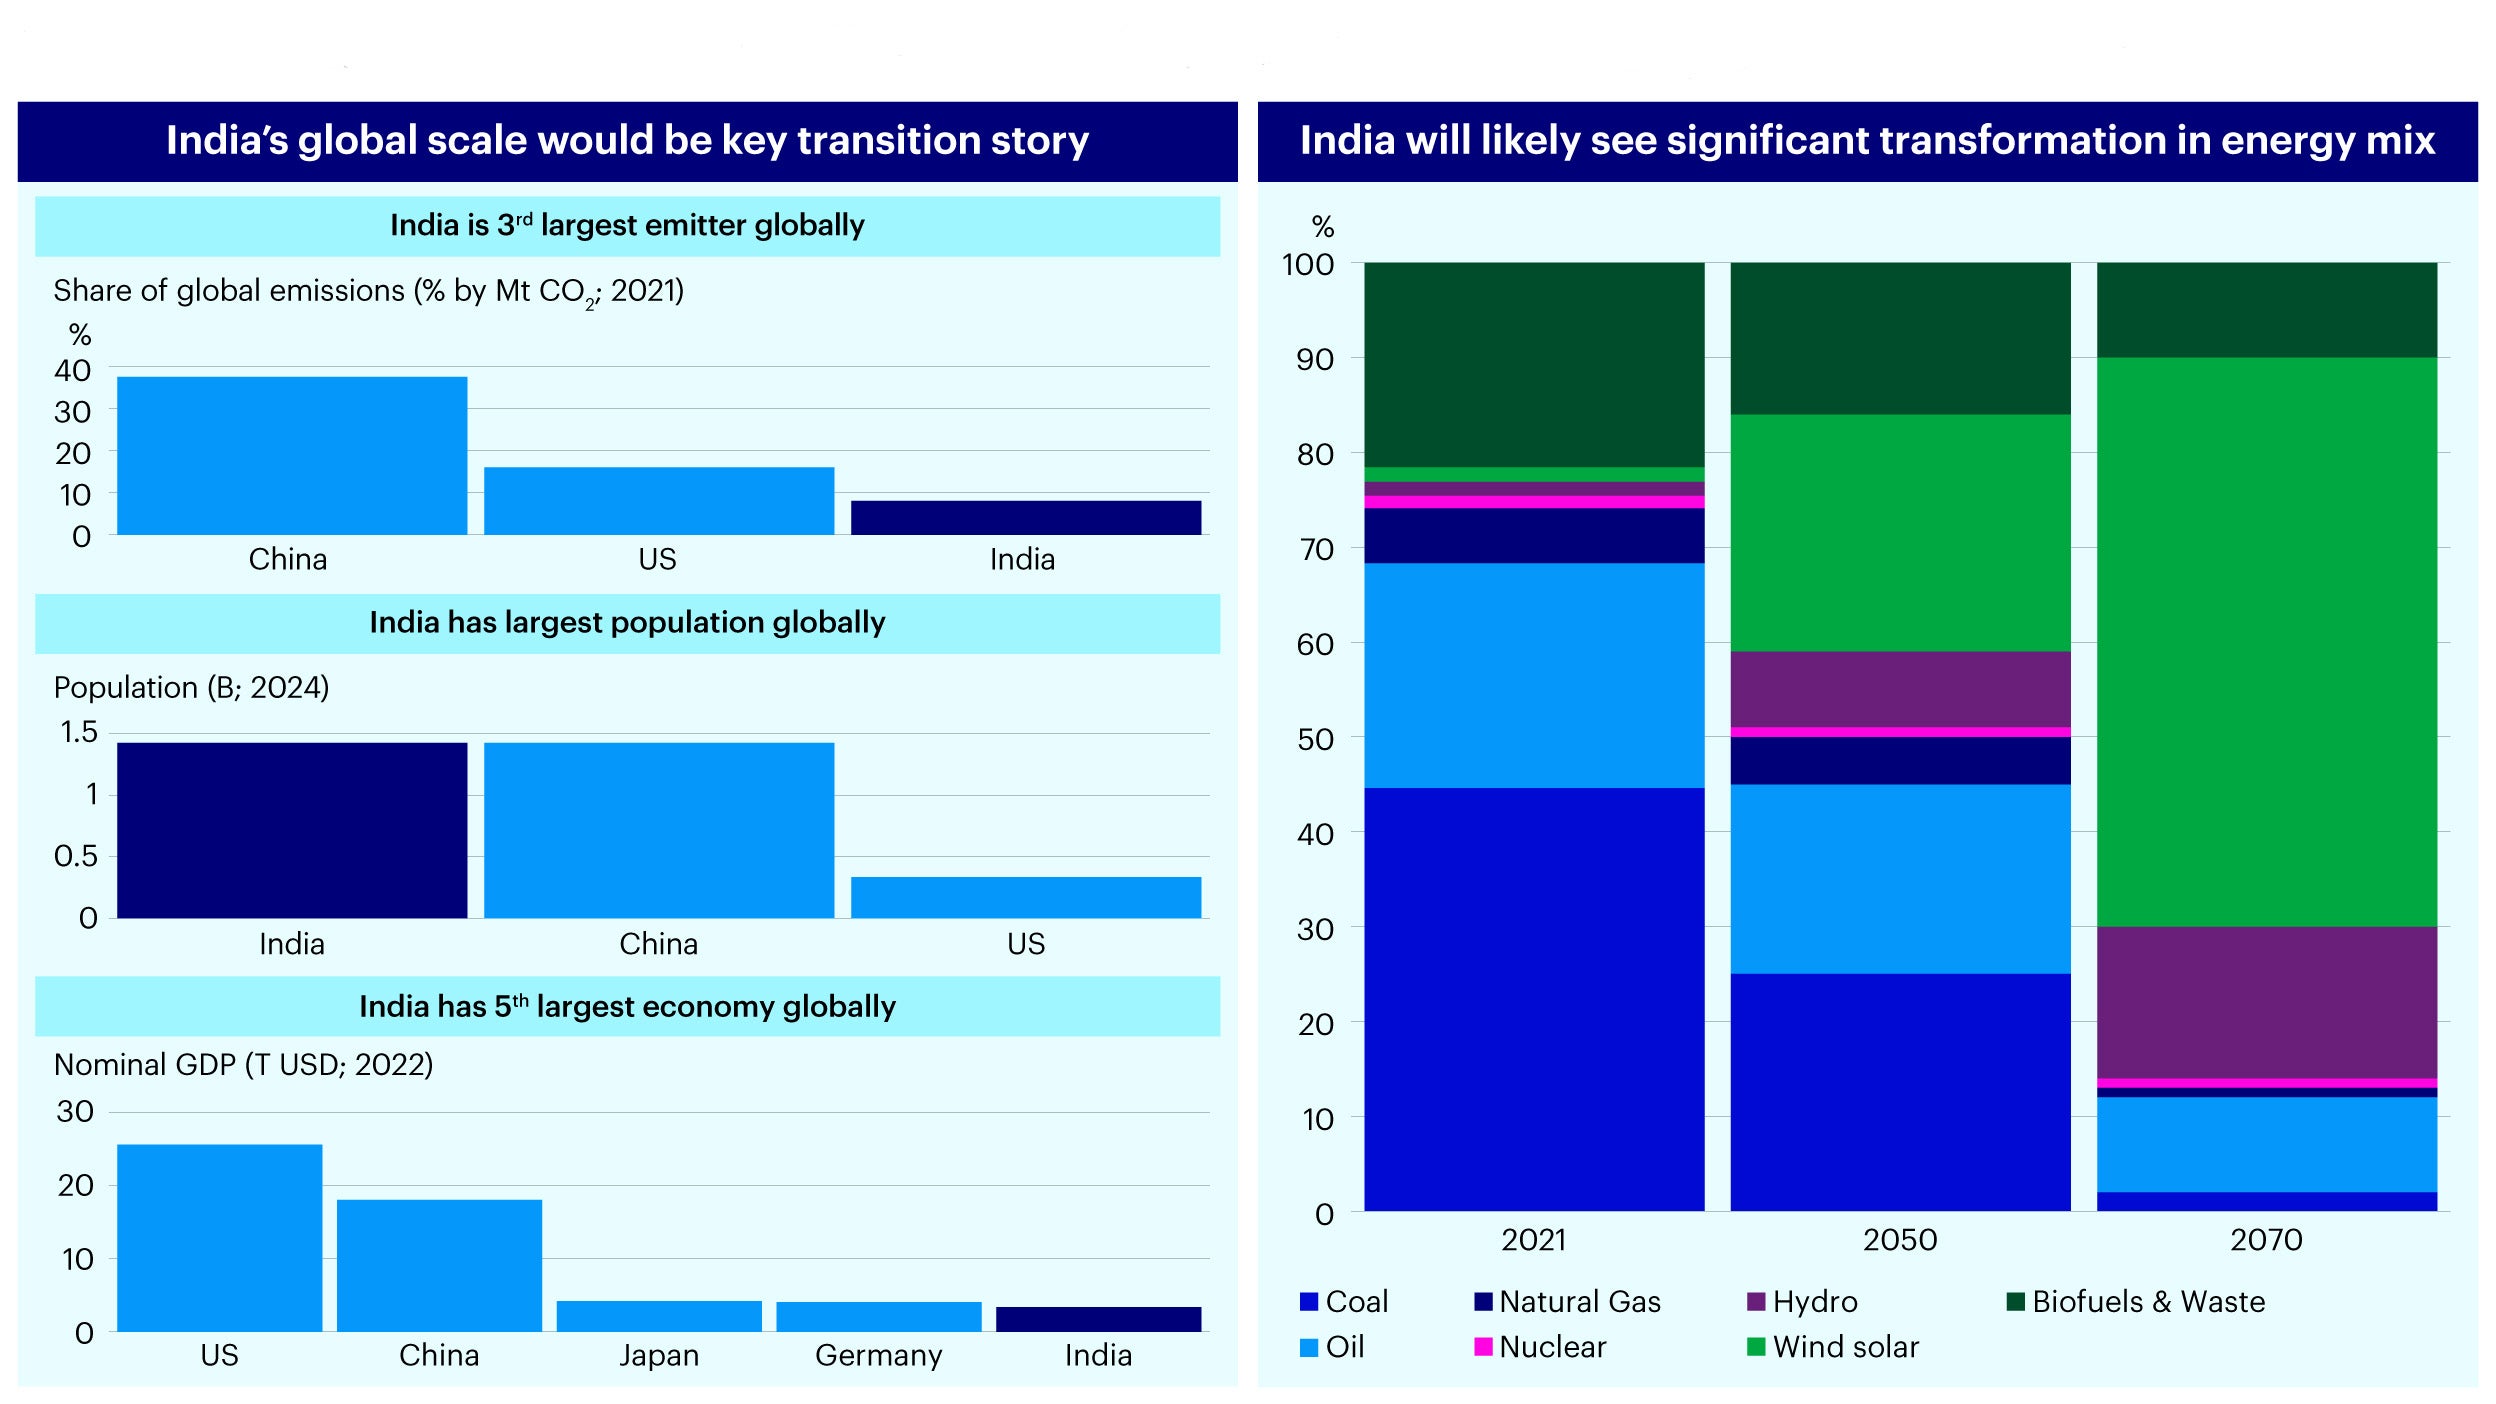 Figure 1 - India’s transition story: global scale will see significant transition opportunities and risks